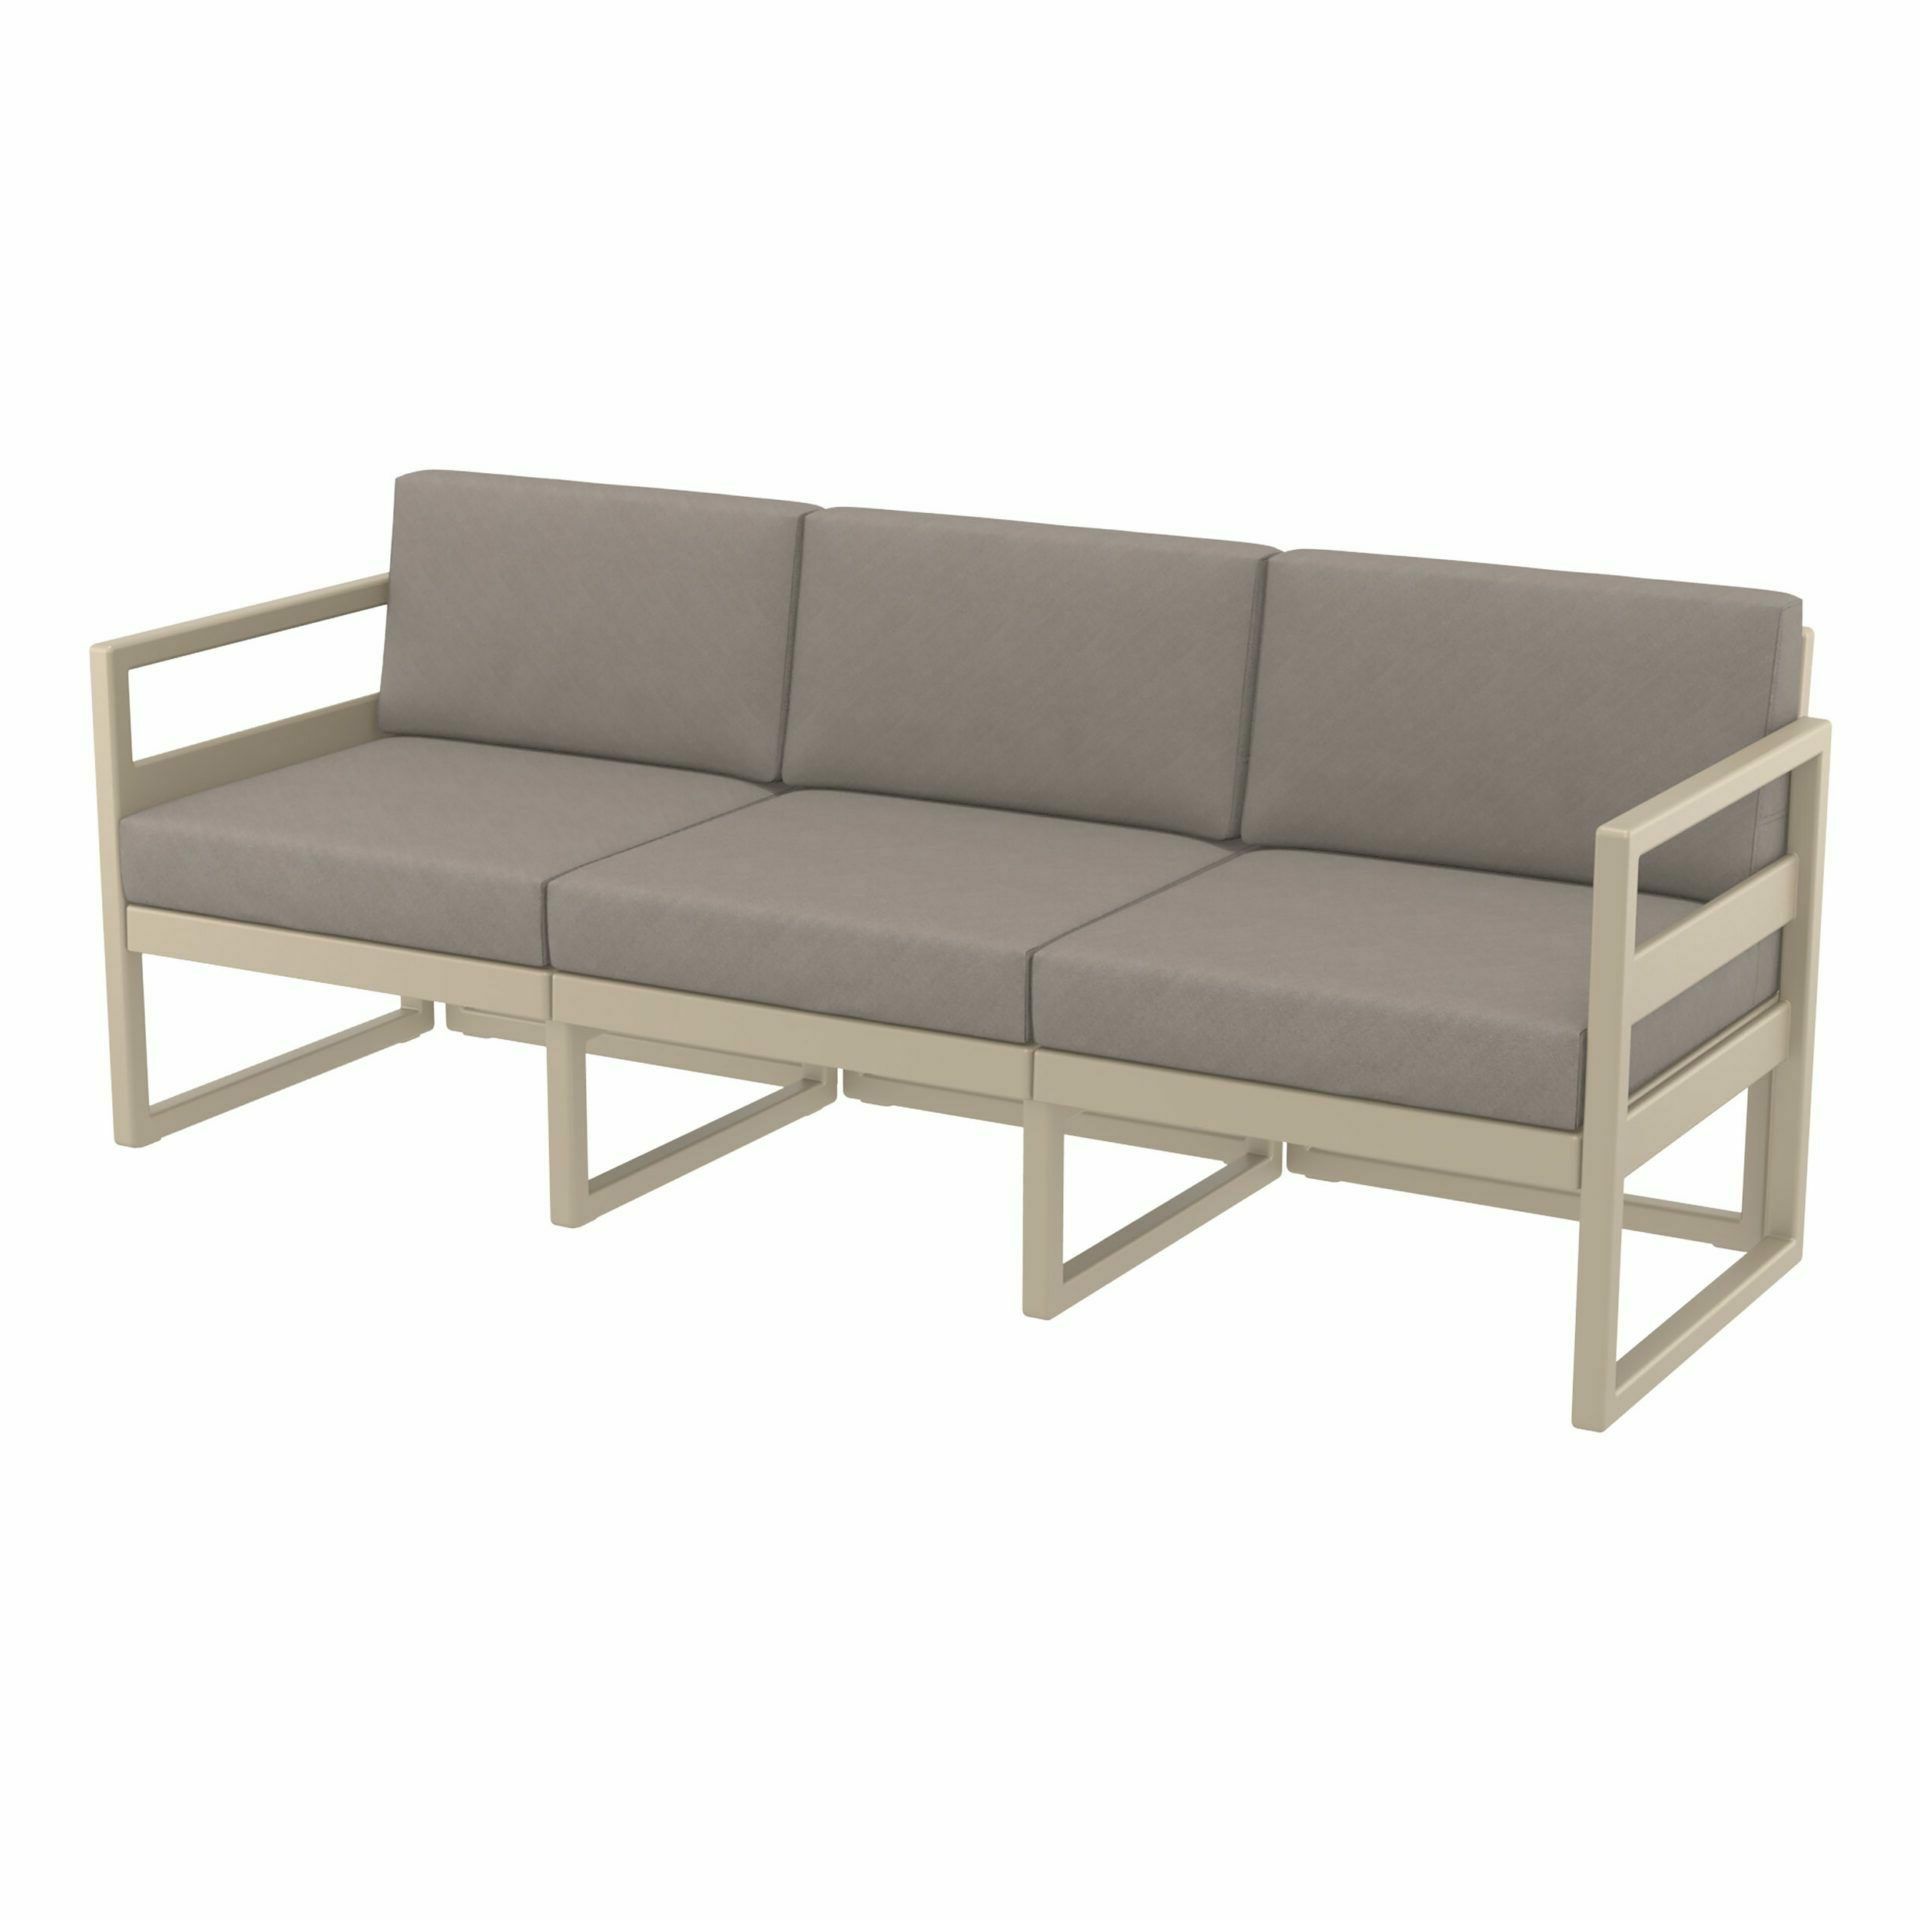 Mykonos Lounge Sofa XL - Taupe with Light Brown Cushions